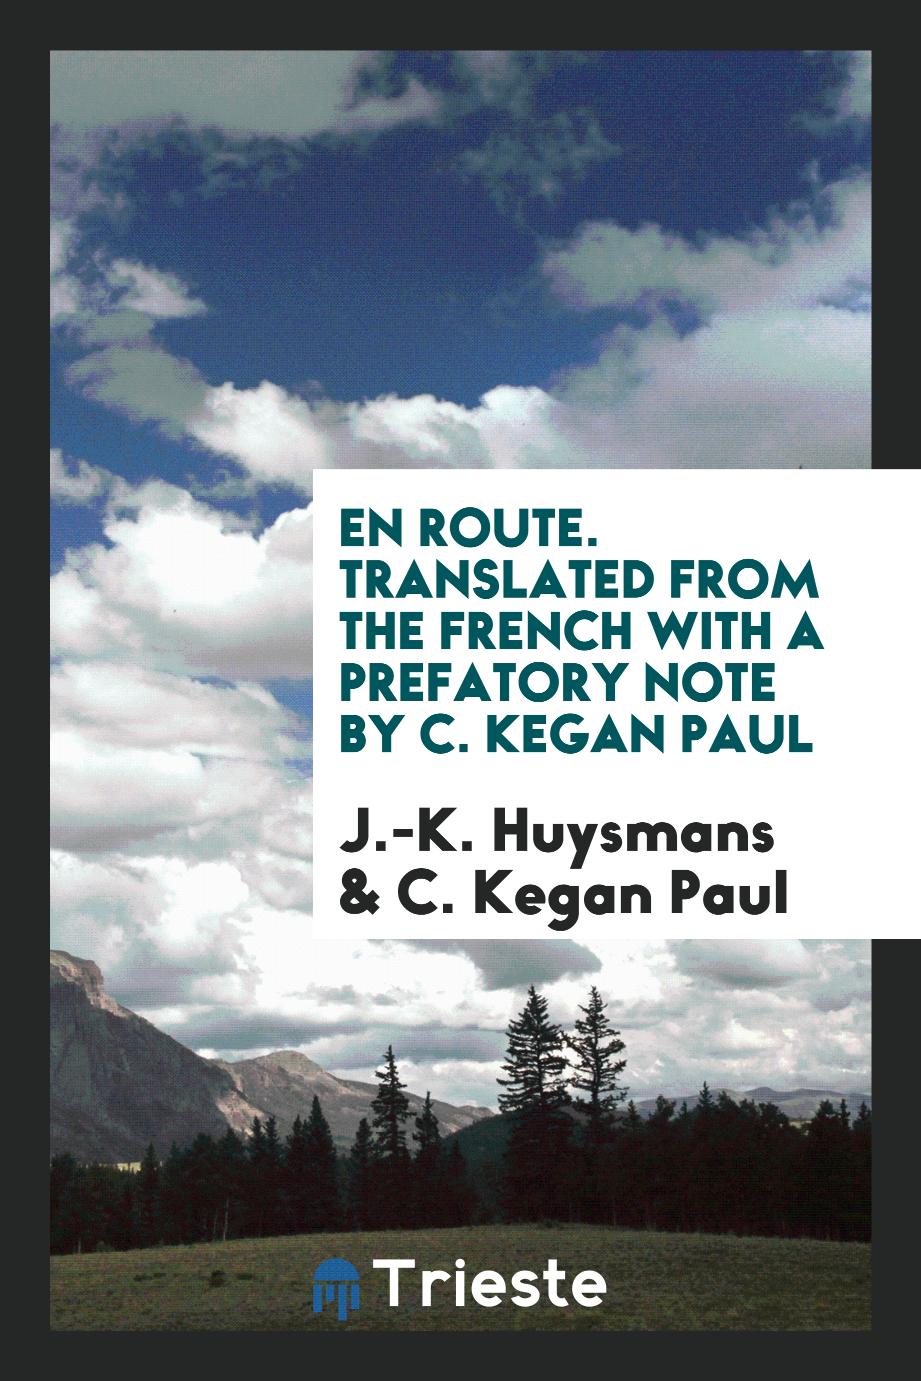 J.-K. Huysmans, C. Kegan Paul - En Route. Translated from the French with a Prefatory Note by C. Kegan Paul